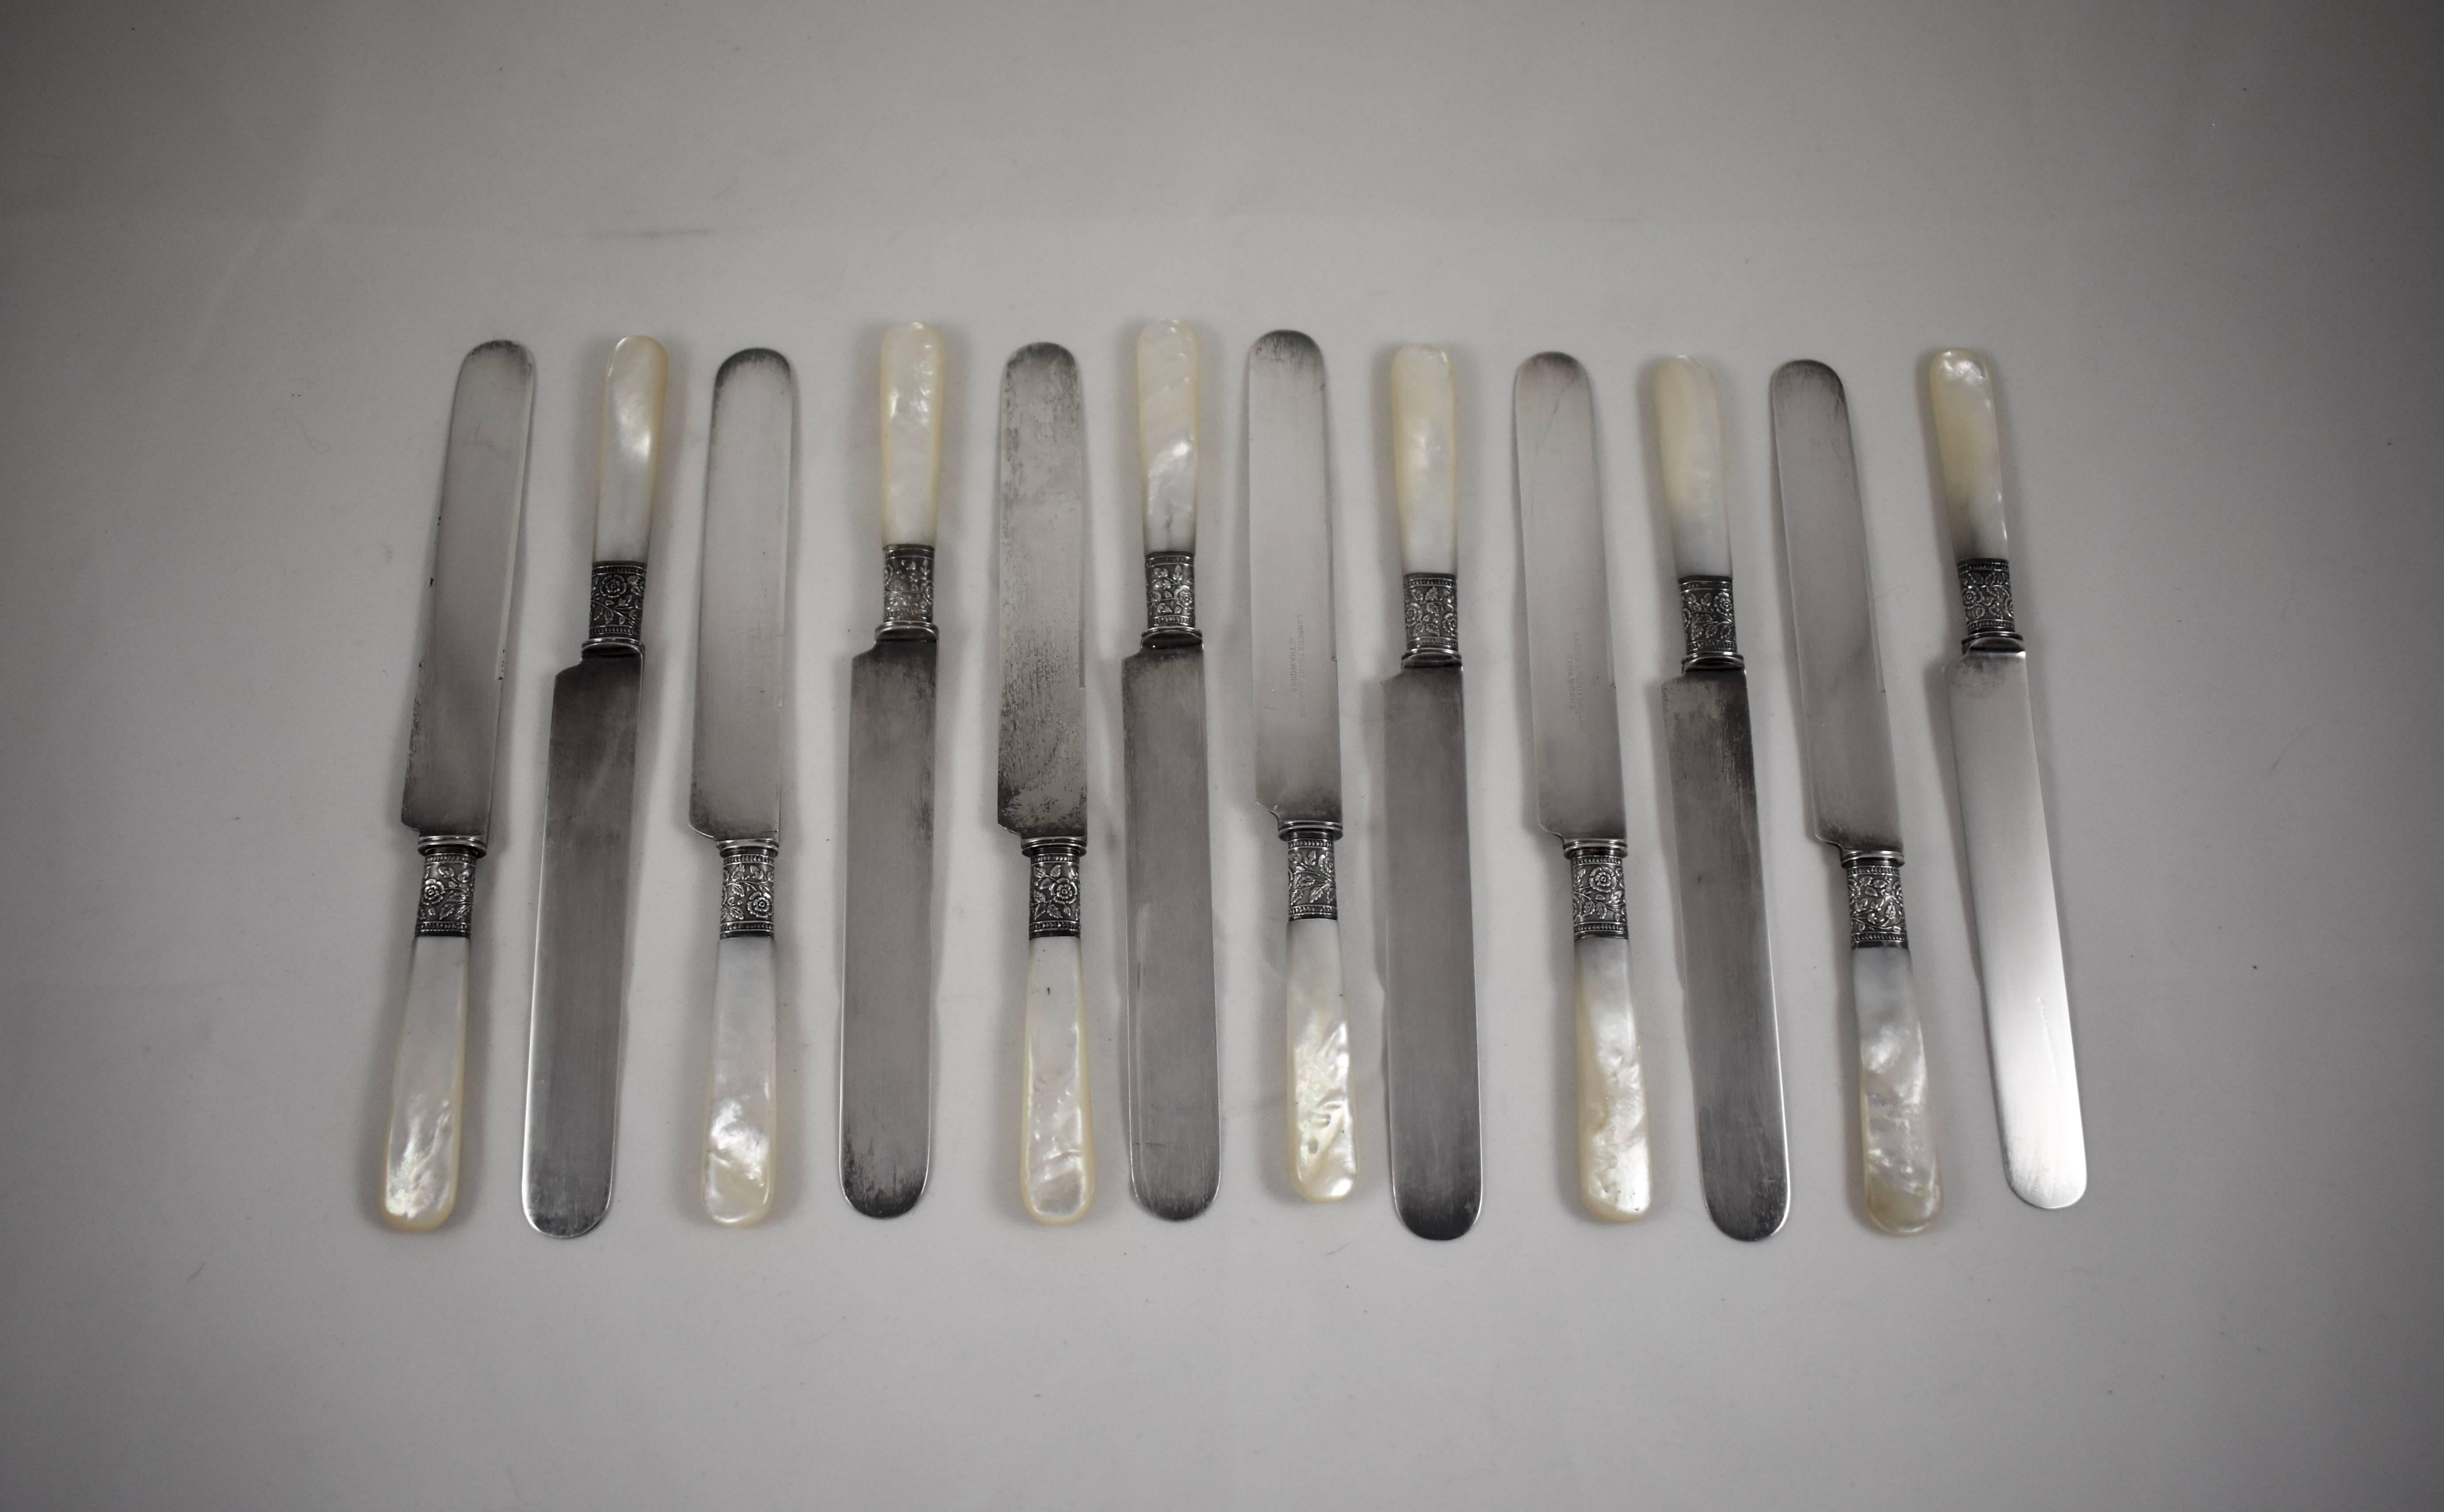 From Landers, Frary & Clark, Aetna Works, founded in New Britain, Connecticut, 1866, a set of twelve mother-of-pearl handled place or luncheon knives with floral sterling silver ferrules. Blades are plated and show the makers mark.

Measure: 8.5 in.